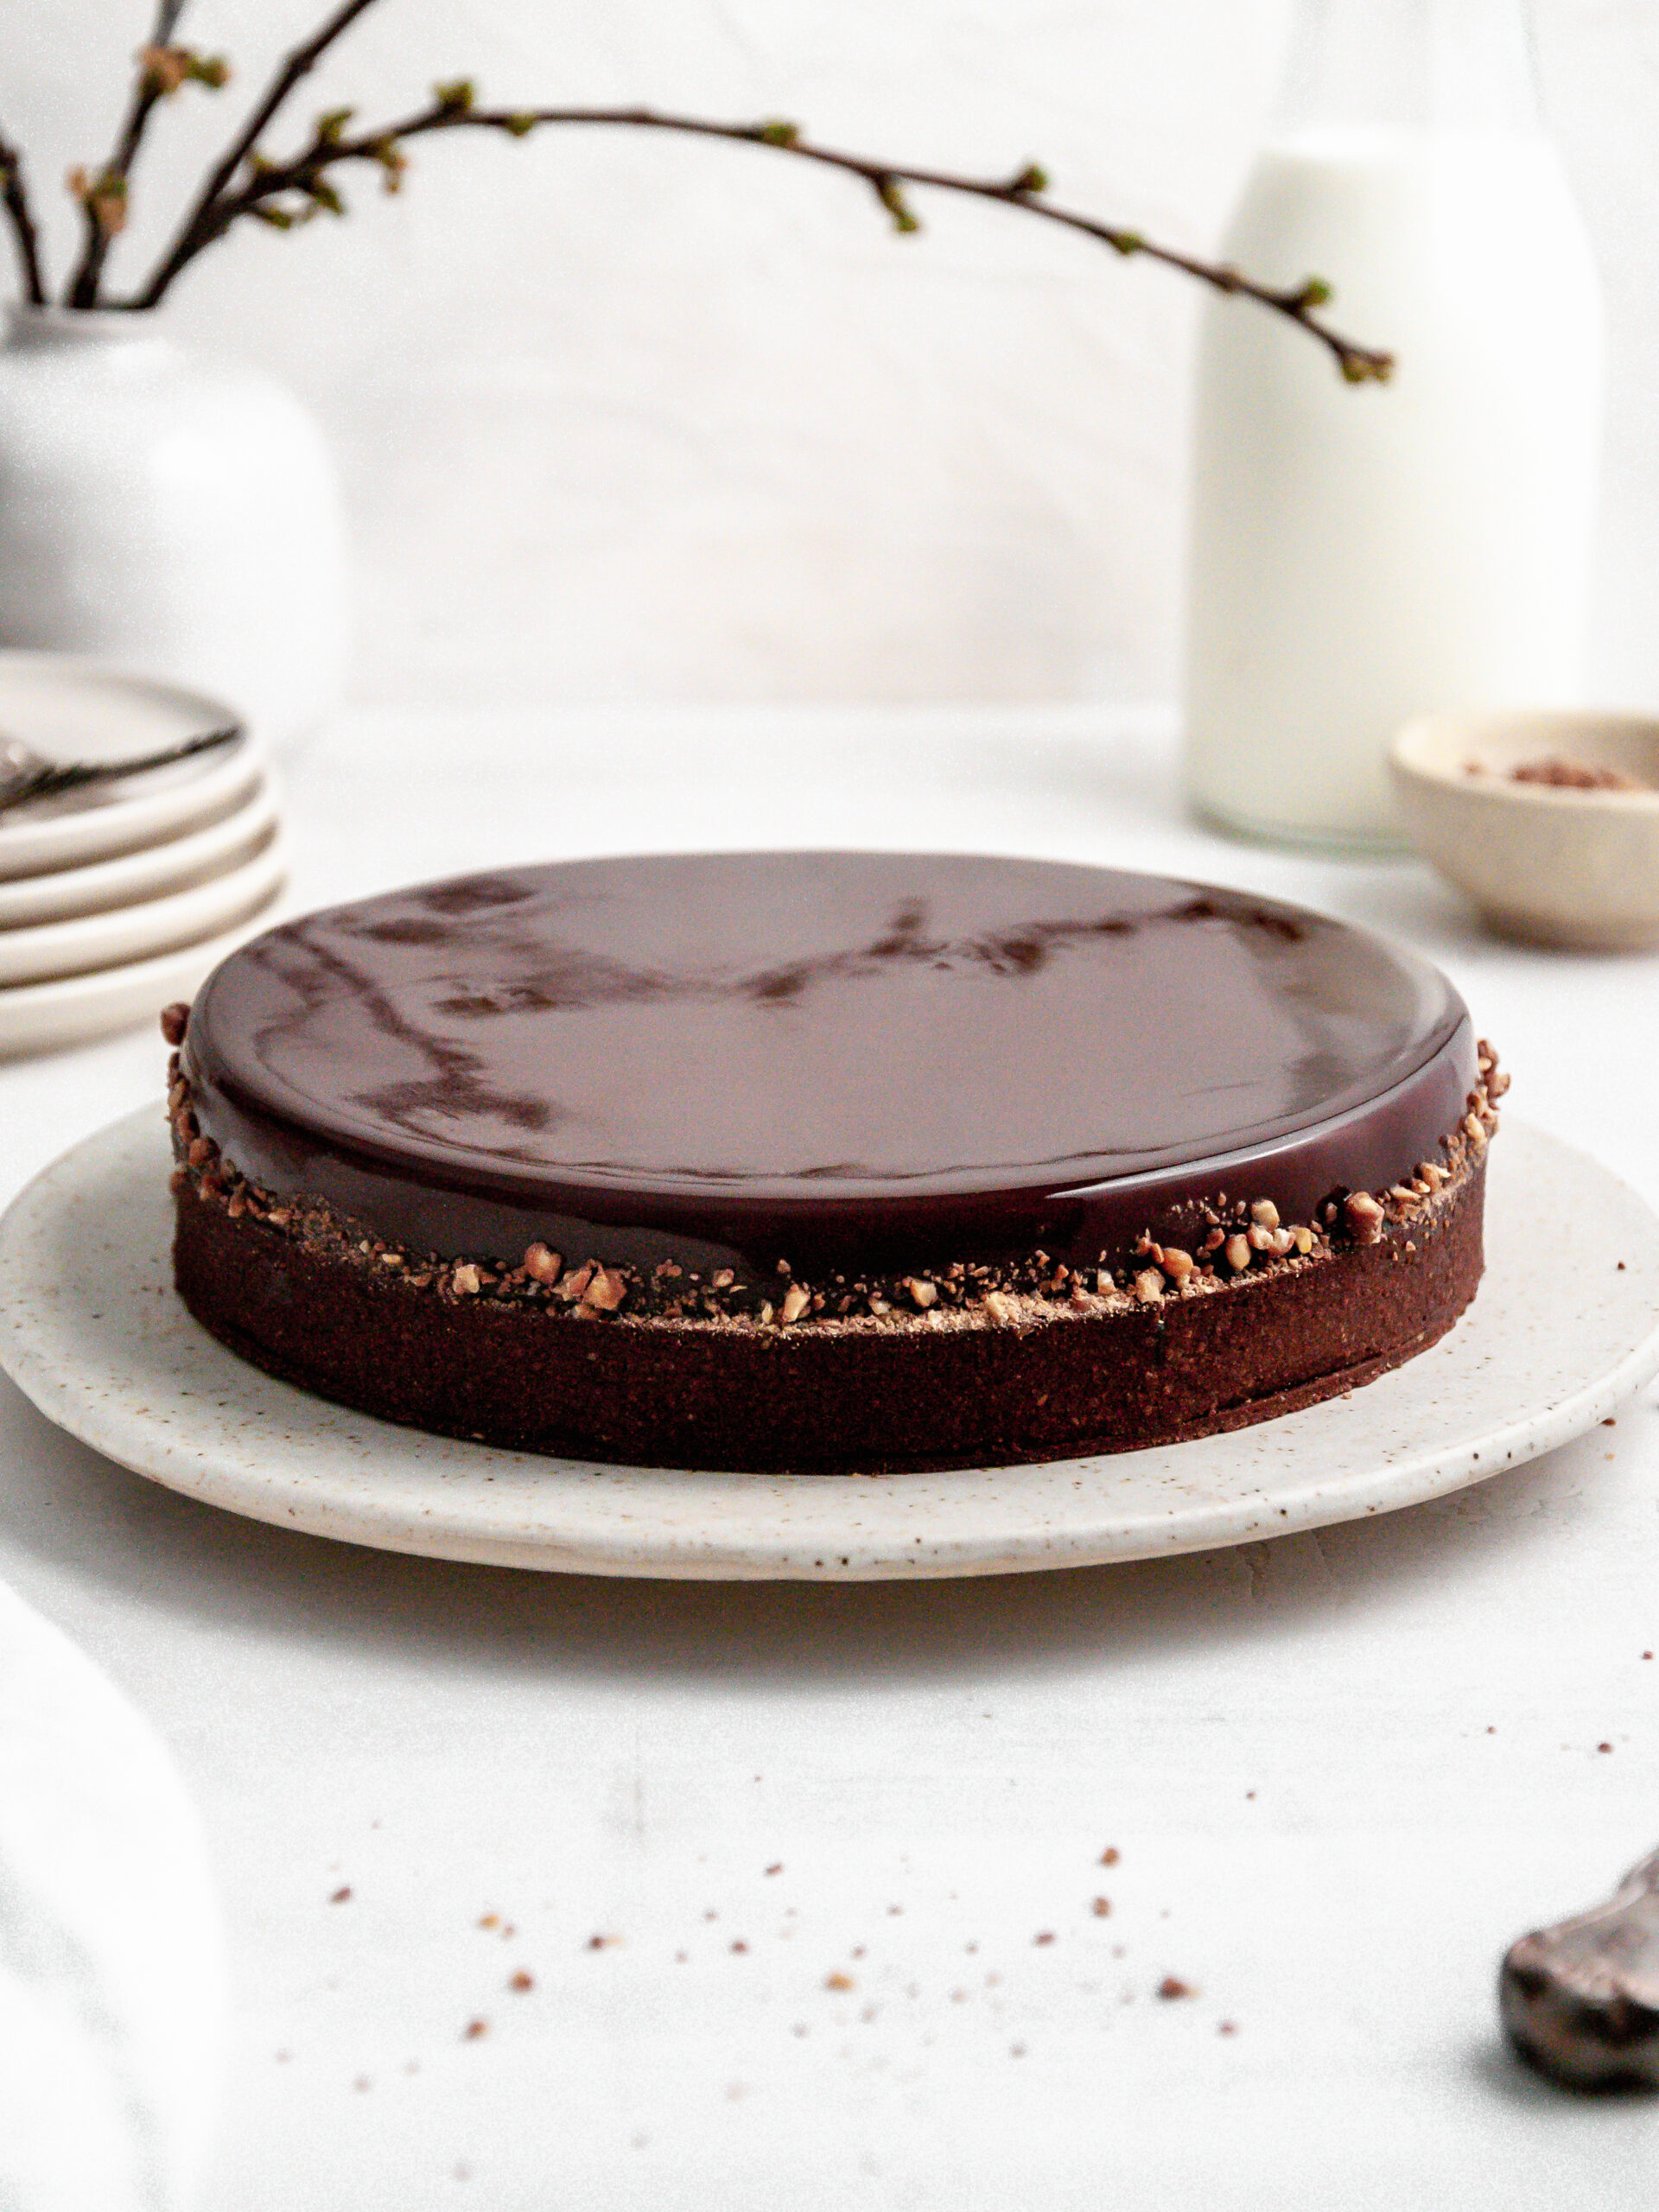 Chocolate Coffee and Caramel Tart on a cake stand.